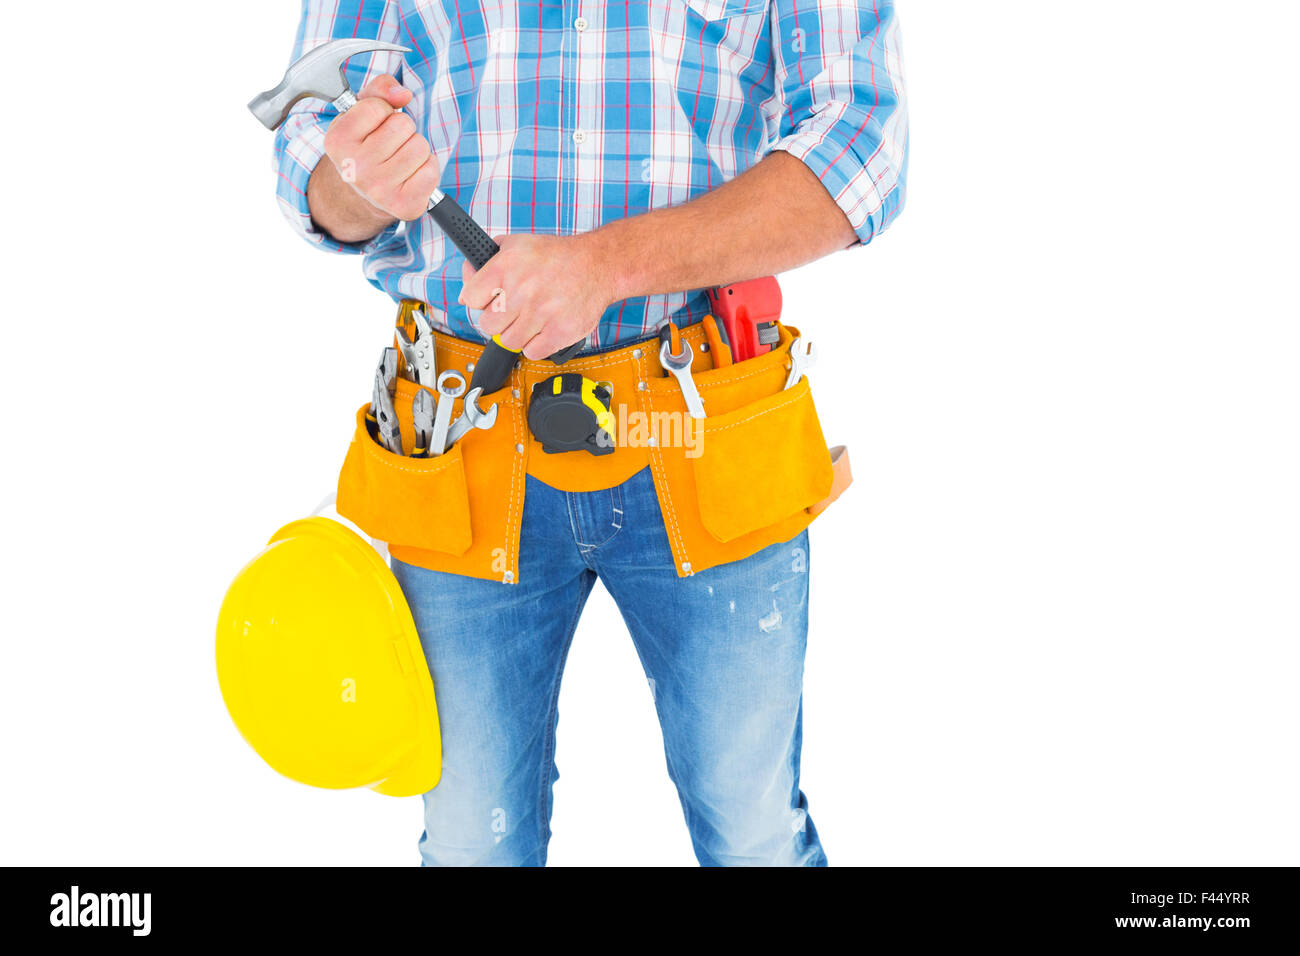 Midsection of manual worker holding hammer Stock Photo